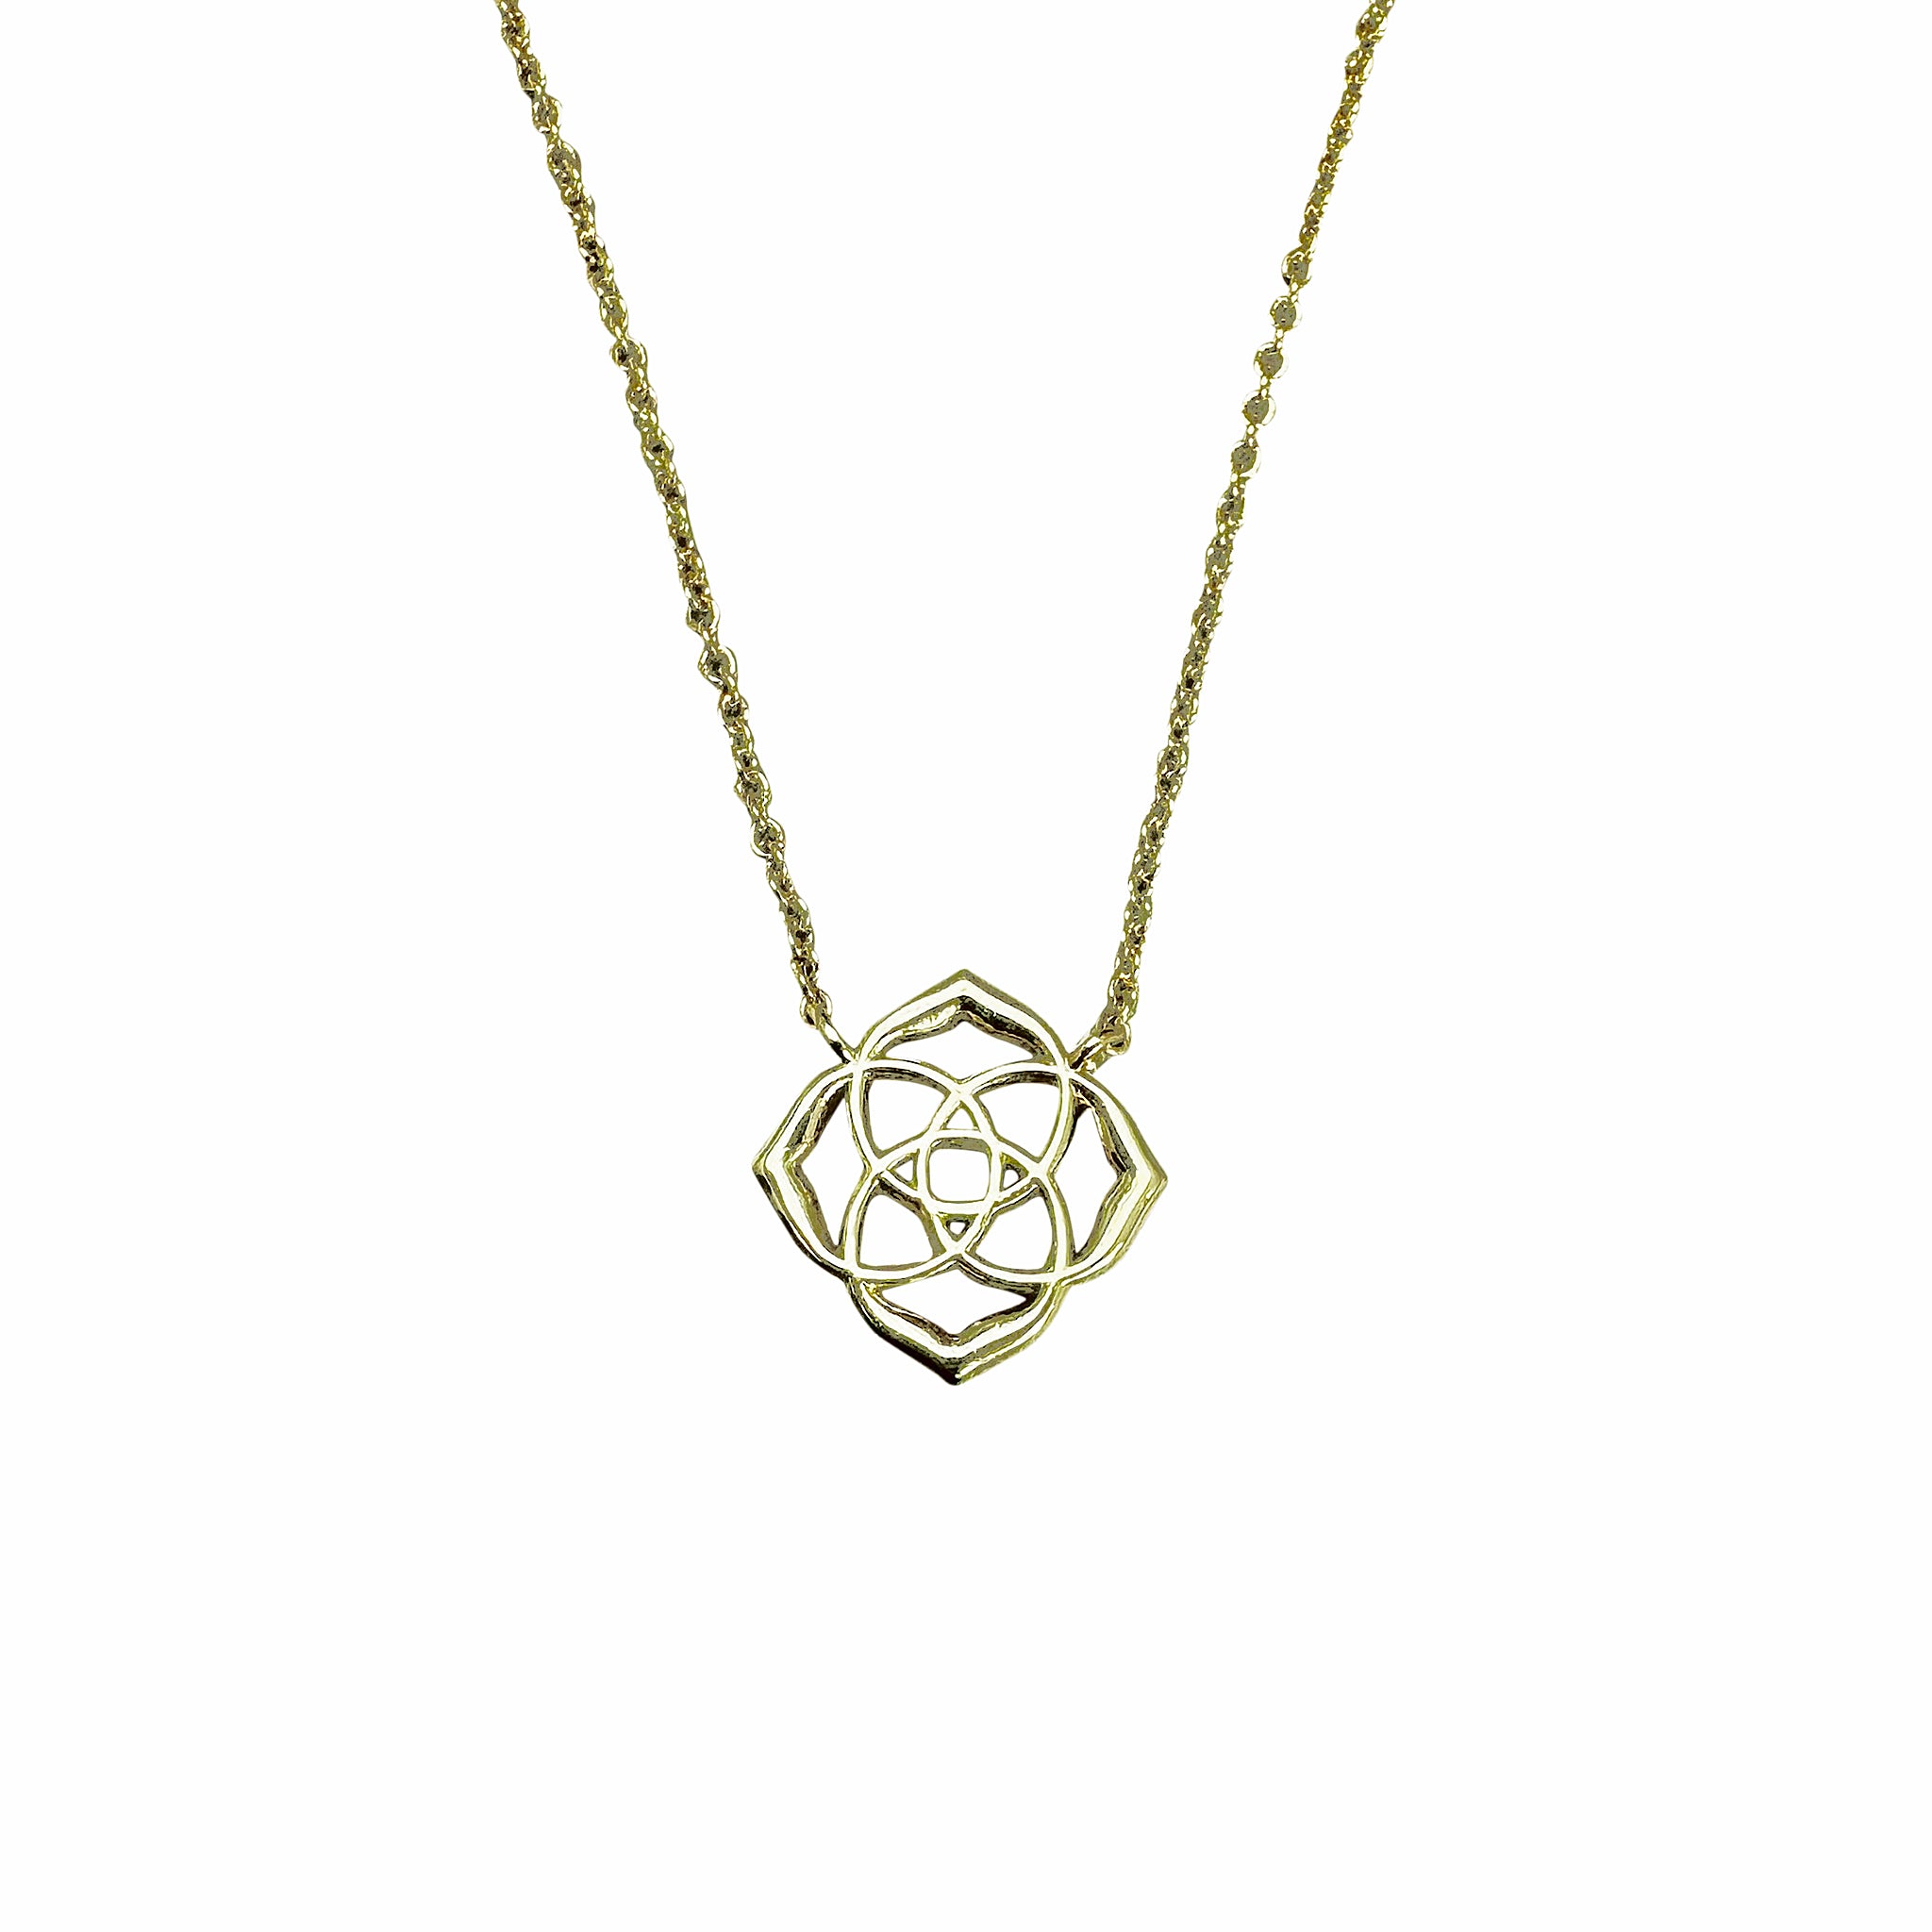 Kendra Scott Decklyn Logo Pendant Necklace in Gold Plated